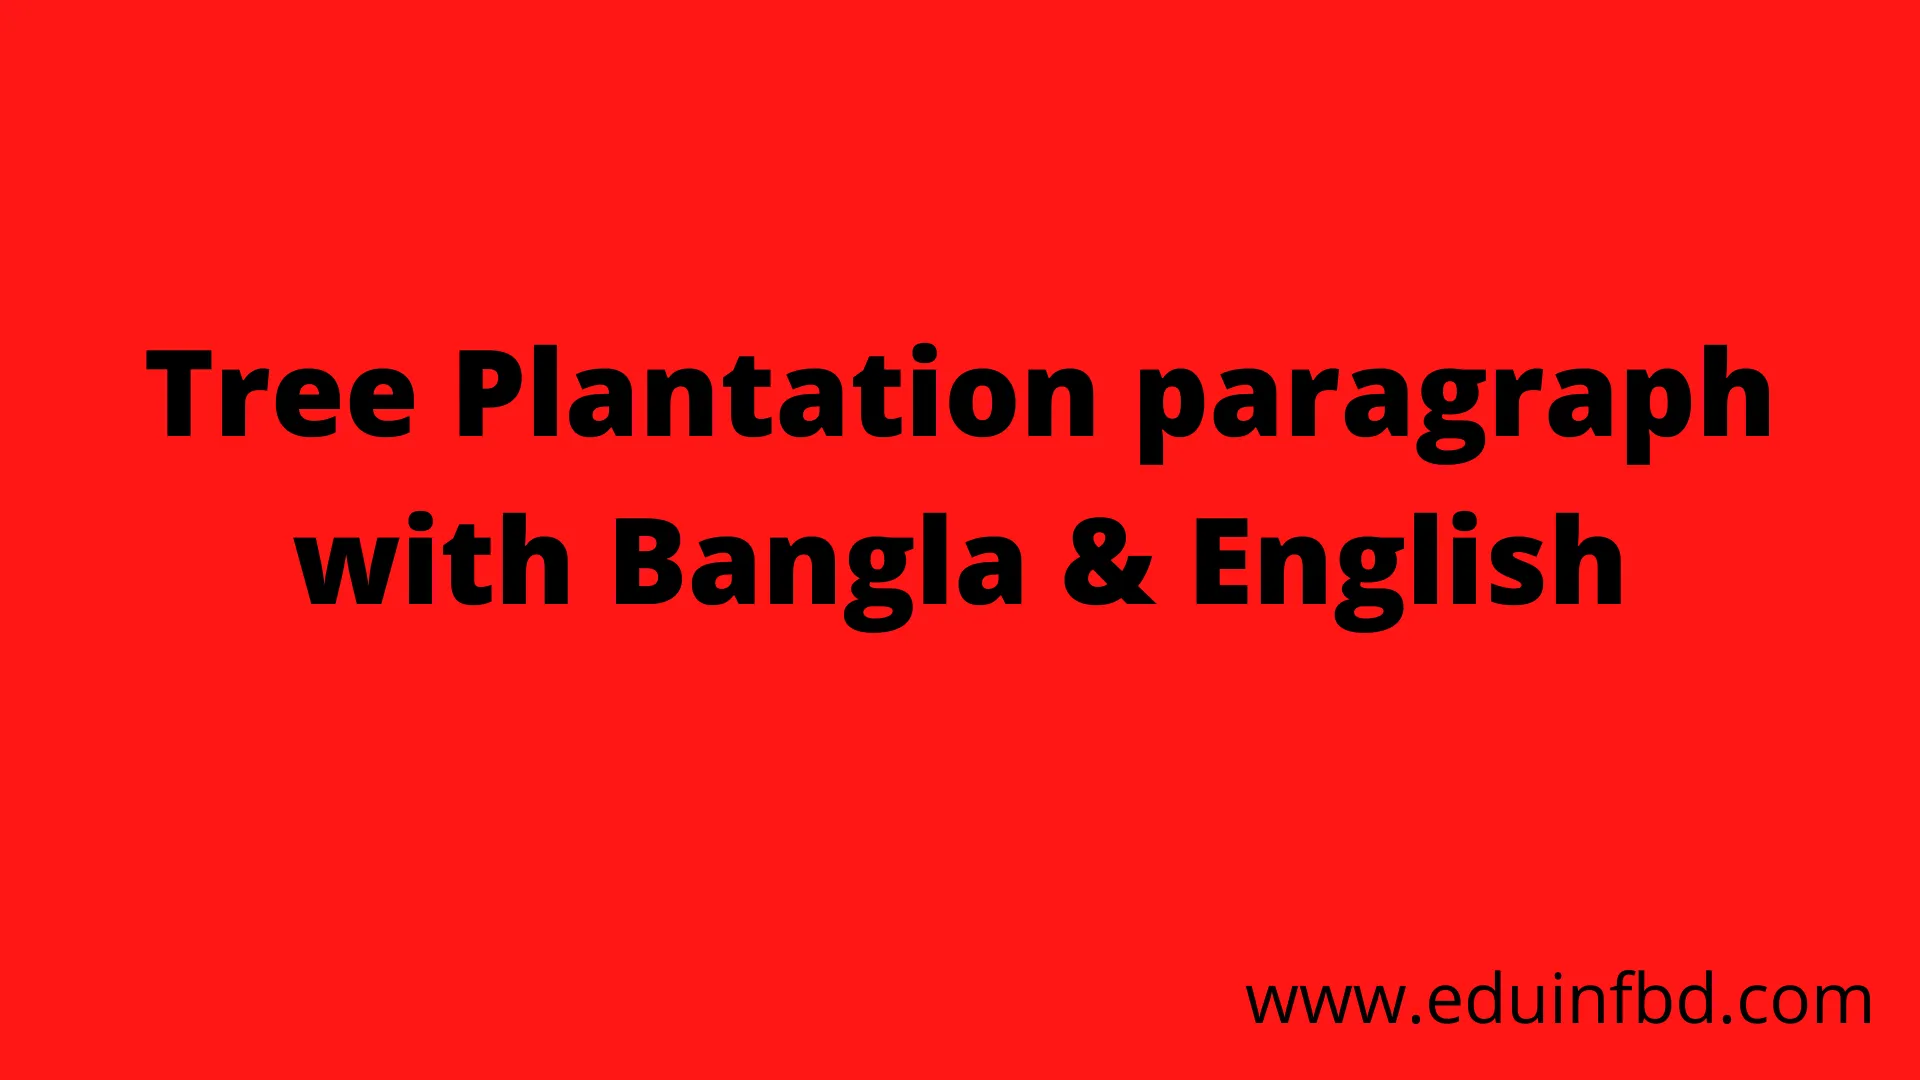 Tree Plantation paragraph with bangla meaning